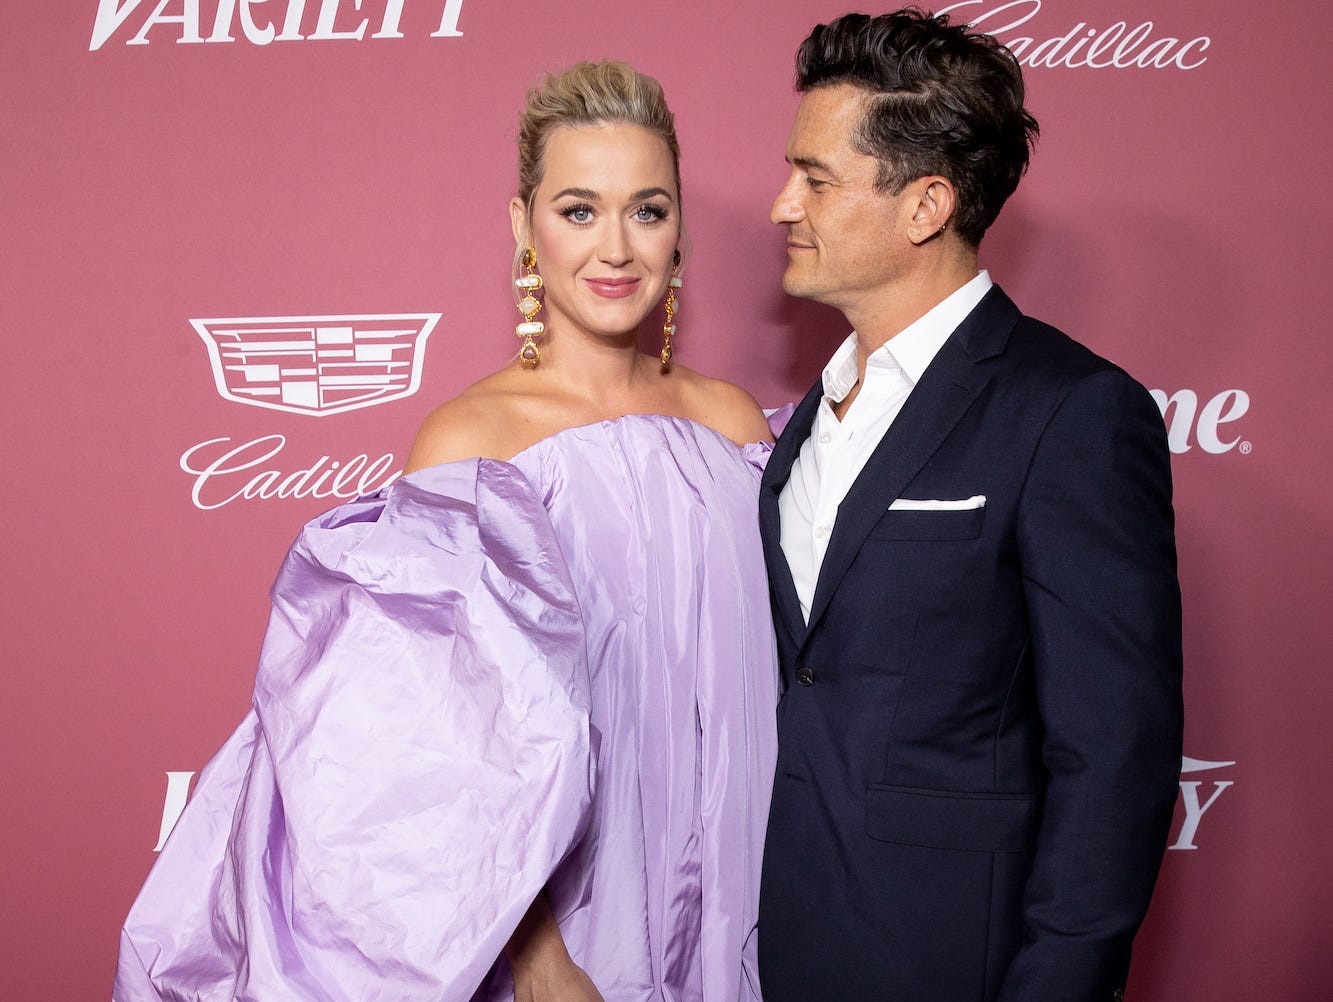 Katy Perry and Orlando Bloom at Variety's Power of Women event on September 30, 2021.